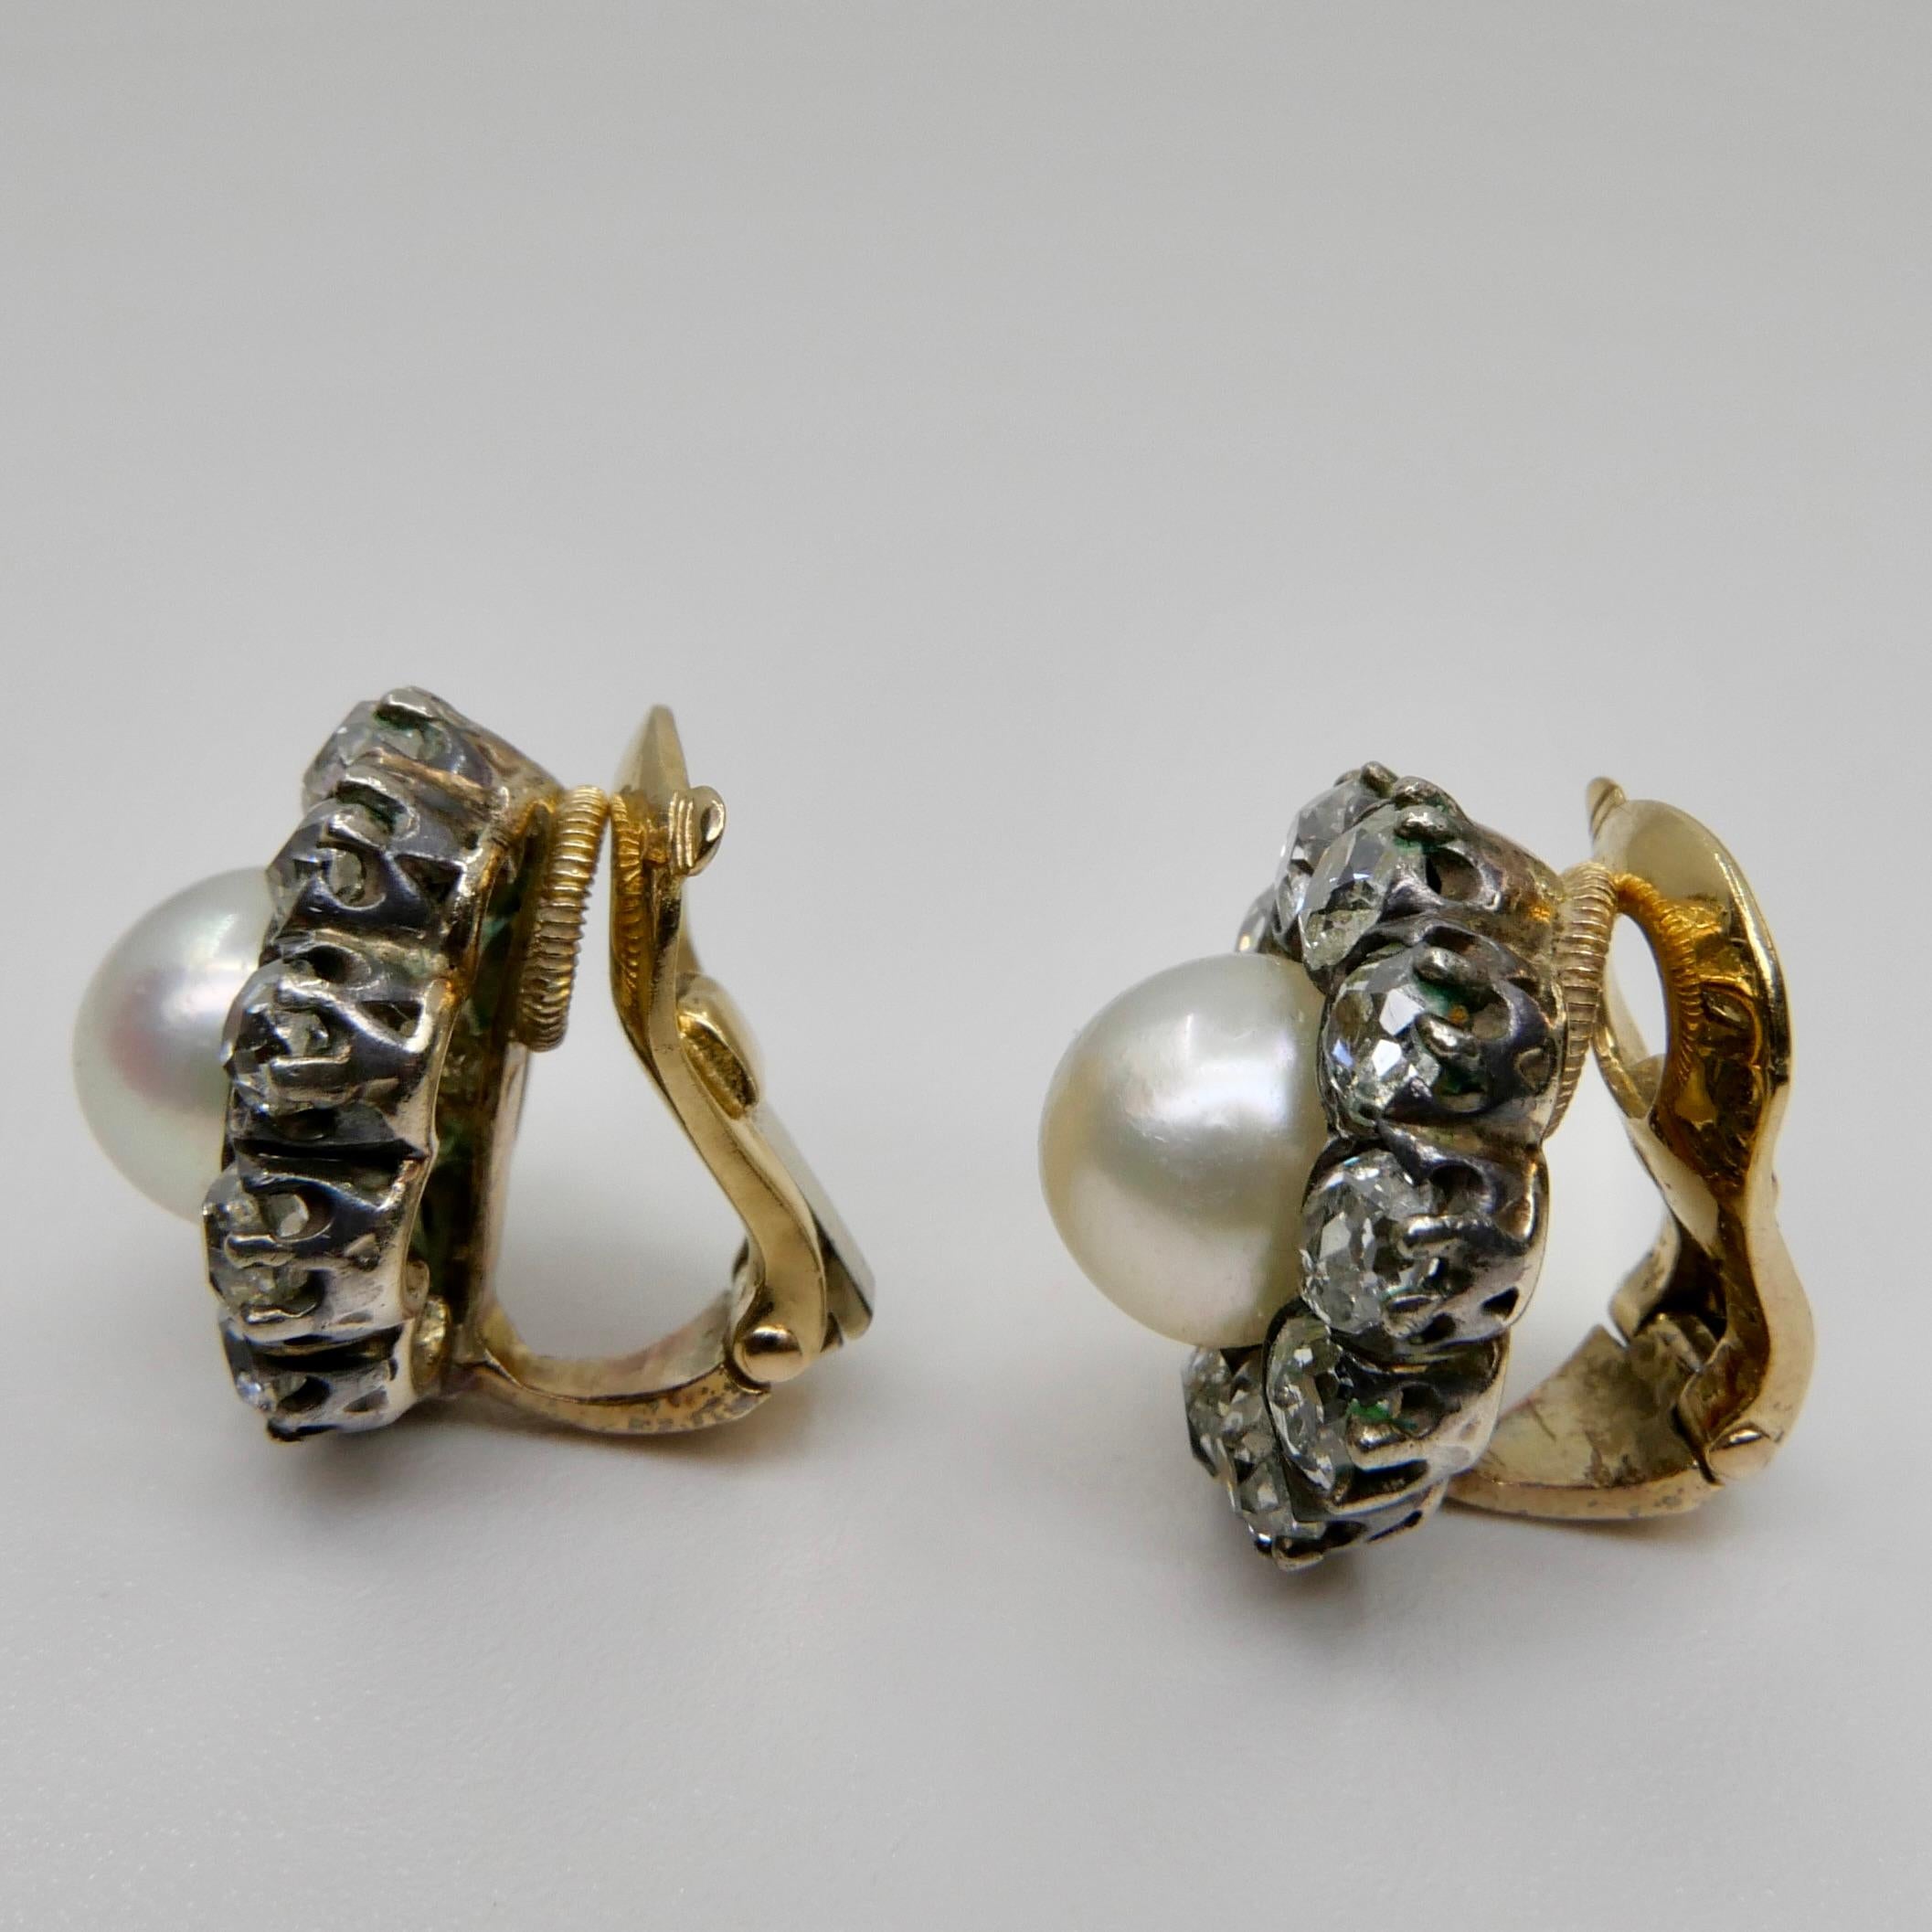 Antique Natural Pearl & Old Cut Diamond Earrings. French Assay & Maker Mark. 6